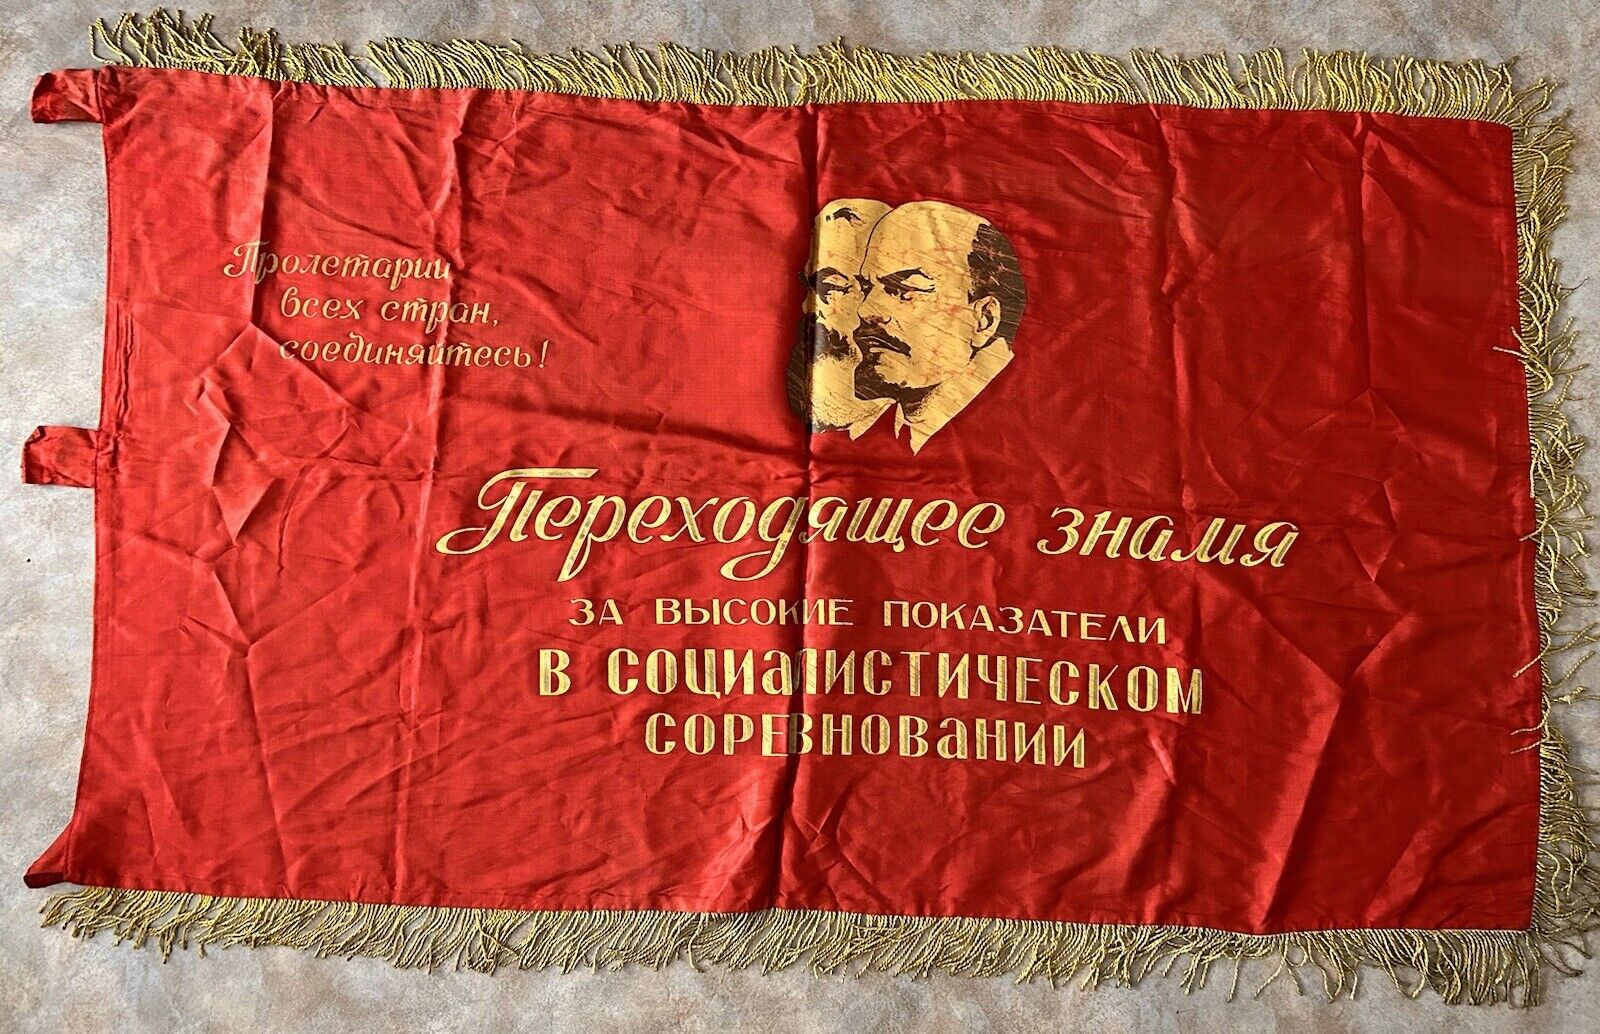 Rare Large Soviet Union Propaganda Flag With Lenin and Marxs, Communist Party